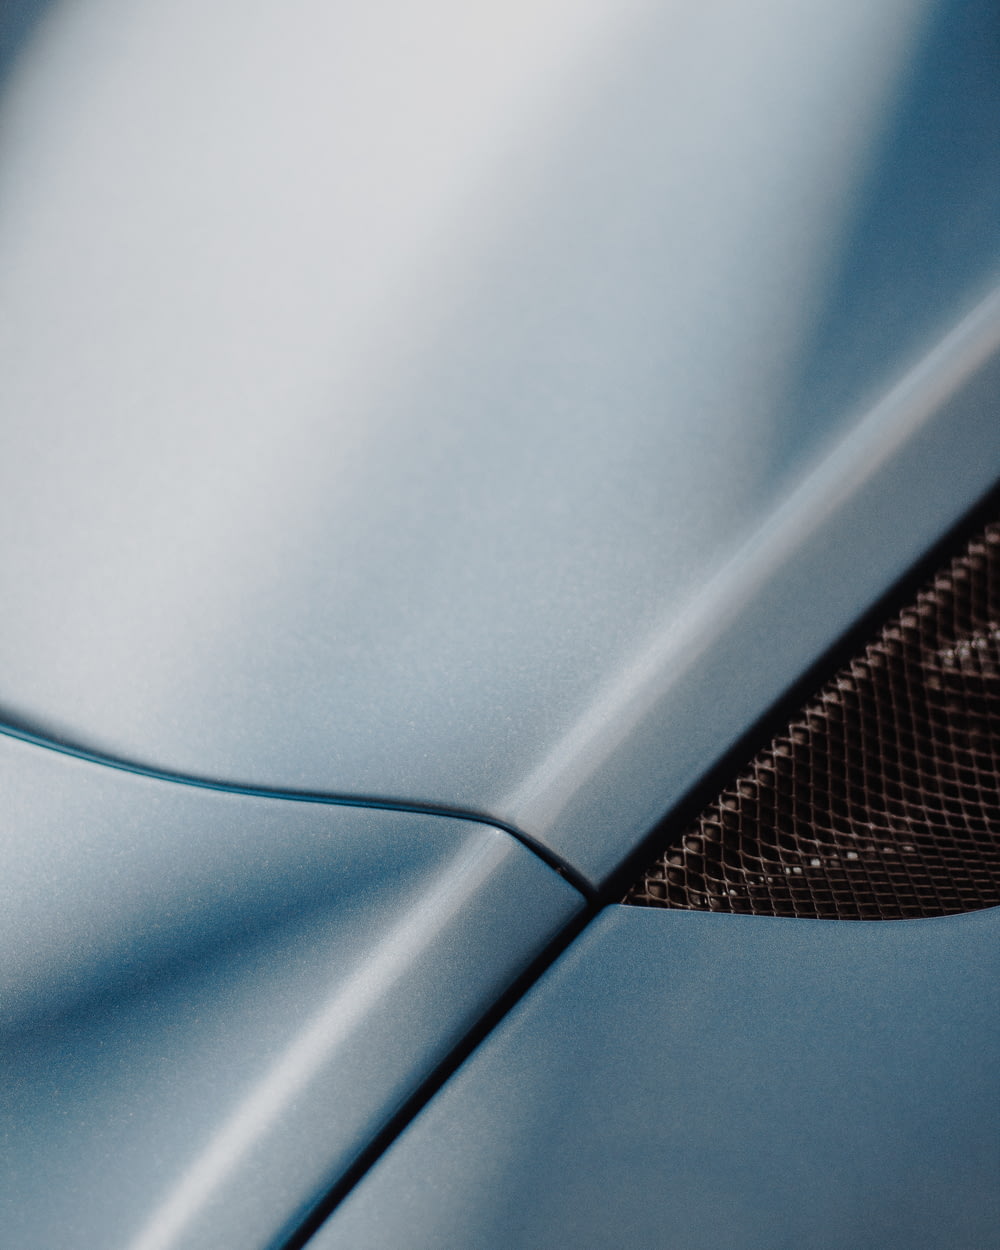 a close up of the hood of a blue sports car